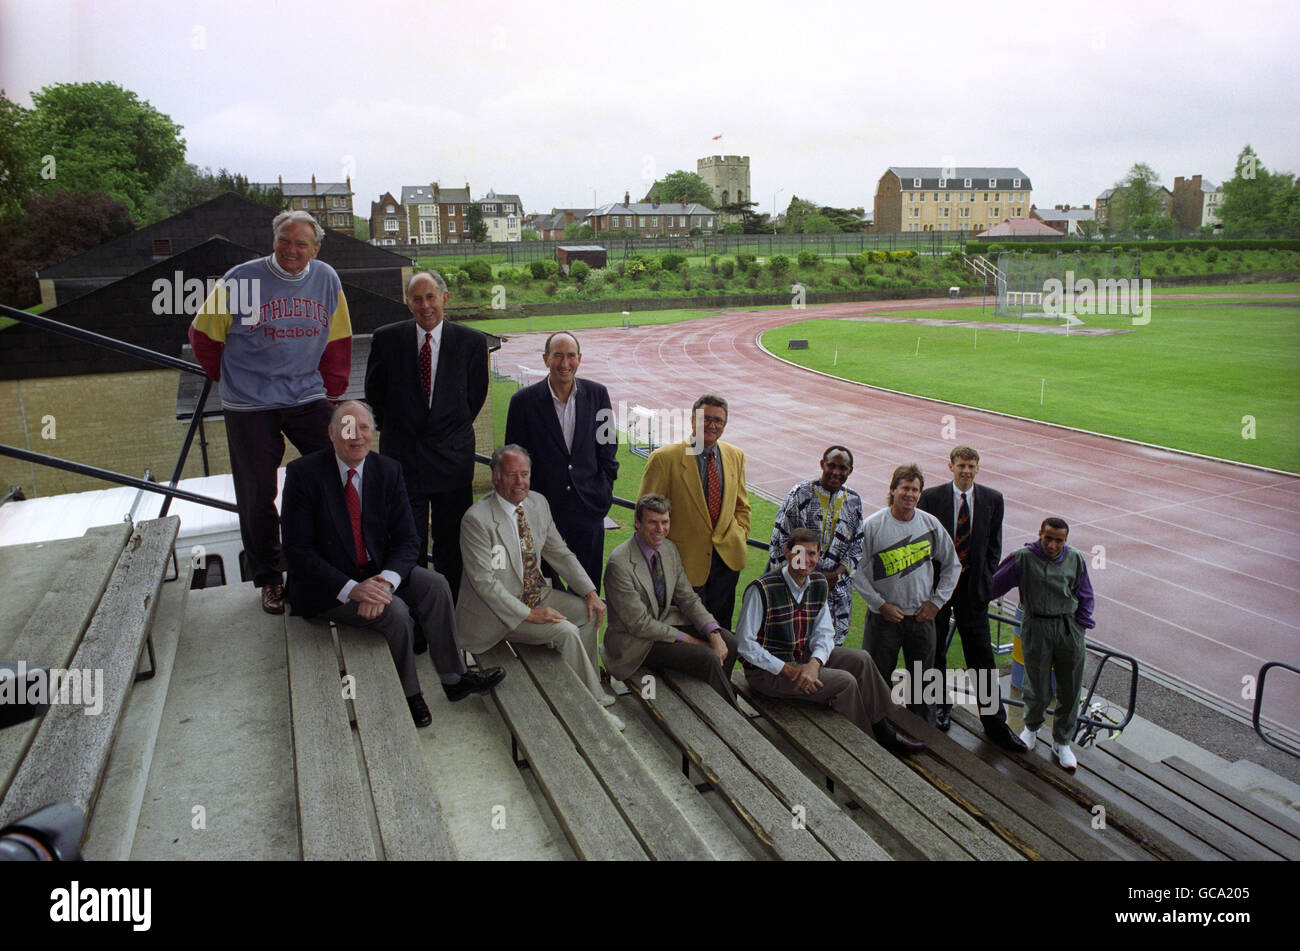 THE WORLD'S MOST BRILLIANT MILERS GATHER AT THE IFFLEY ROAD TRACK AT OXFORD UNIVERSITY, 40 YEARS AFTER SIR ROGER BANNISTER RAN THE FIRST 4-MINUTE- MILE.(L-R STANDING) ARNE ANDERSON, JOHN LANDY, HERB ELLIOTT, MICHEL JAZY, FILBERT BAYI,JOHN WALKER, STEVE CRAM. Stock Photo